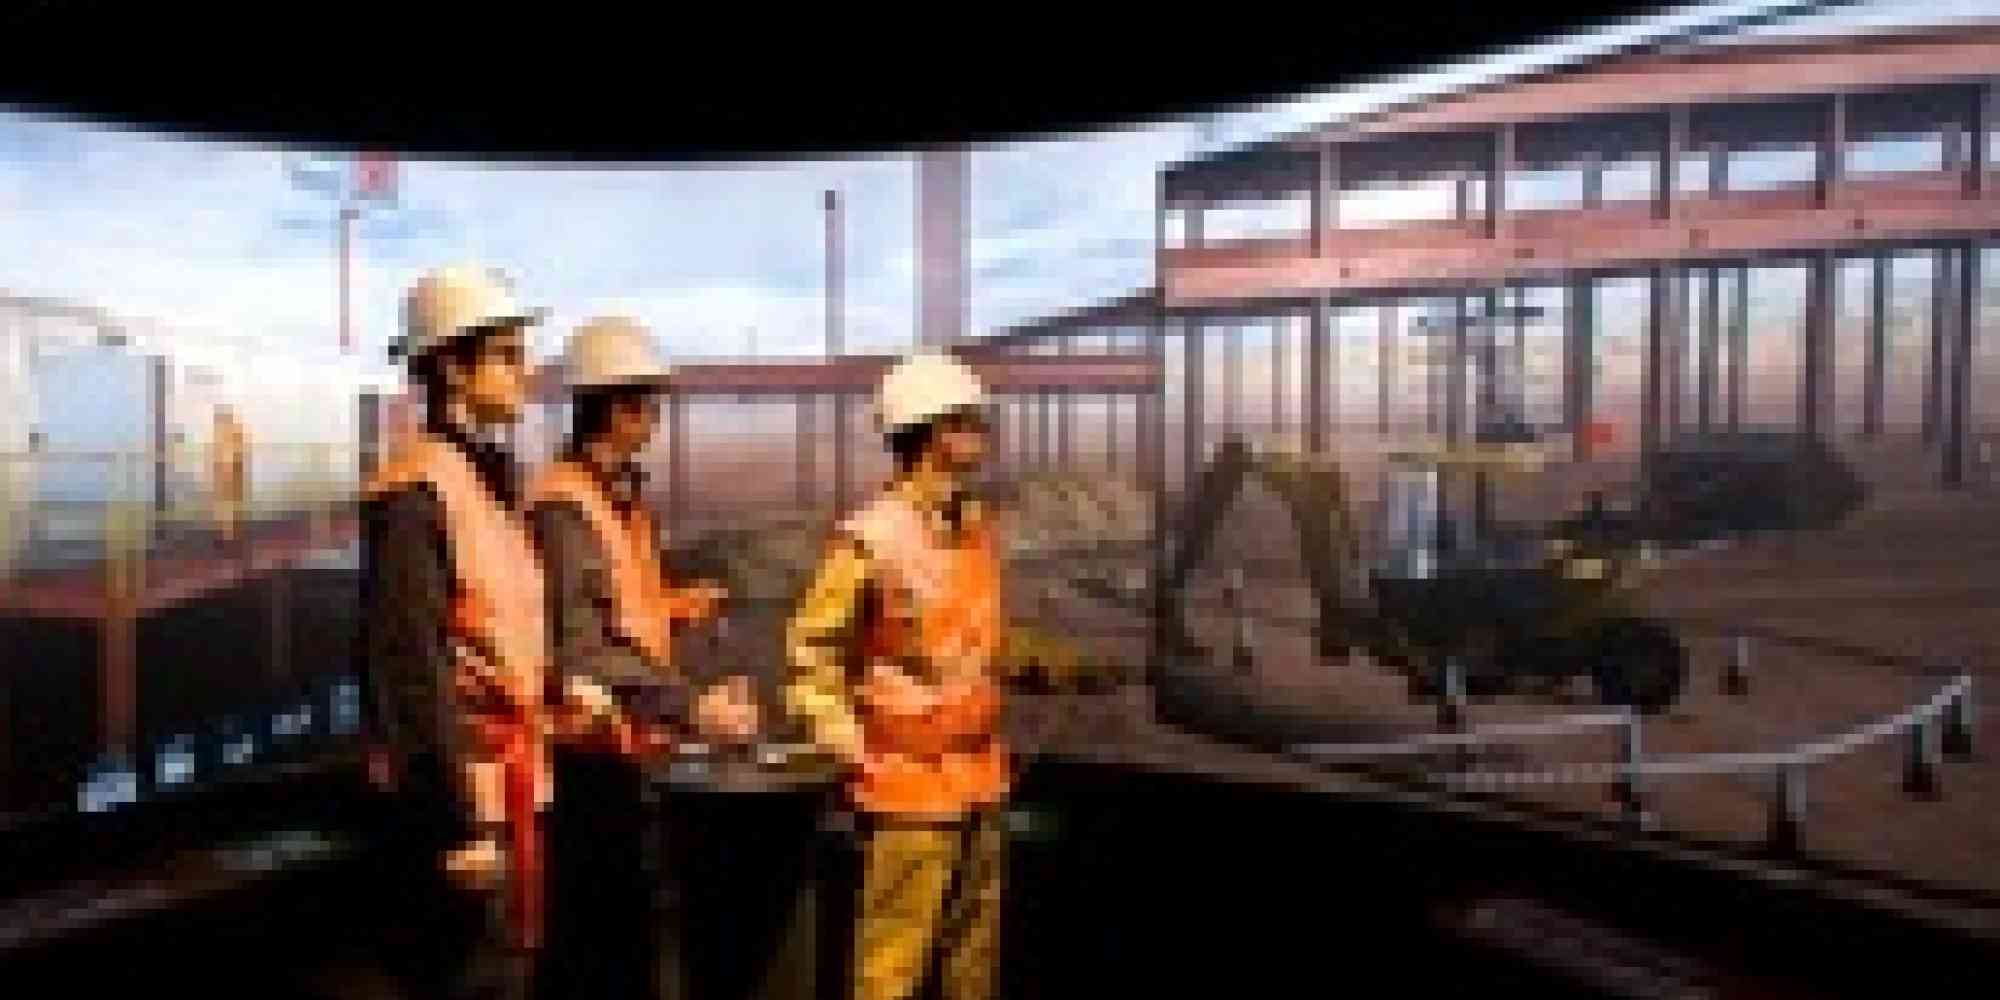 Construction Safety Training in Virtual Reality